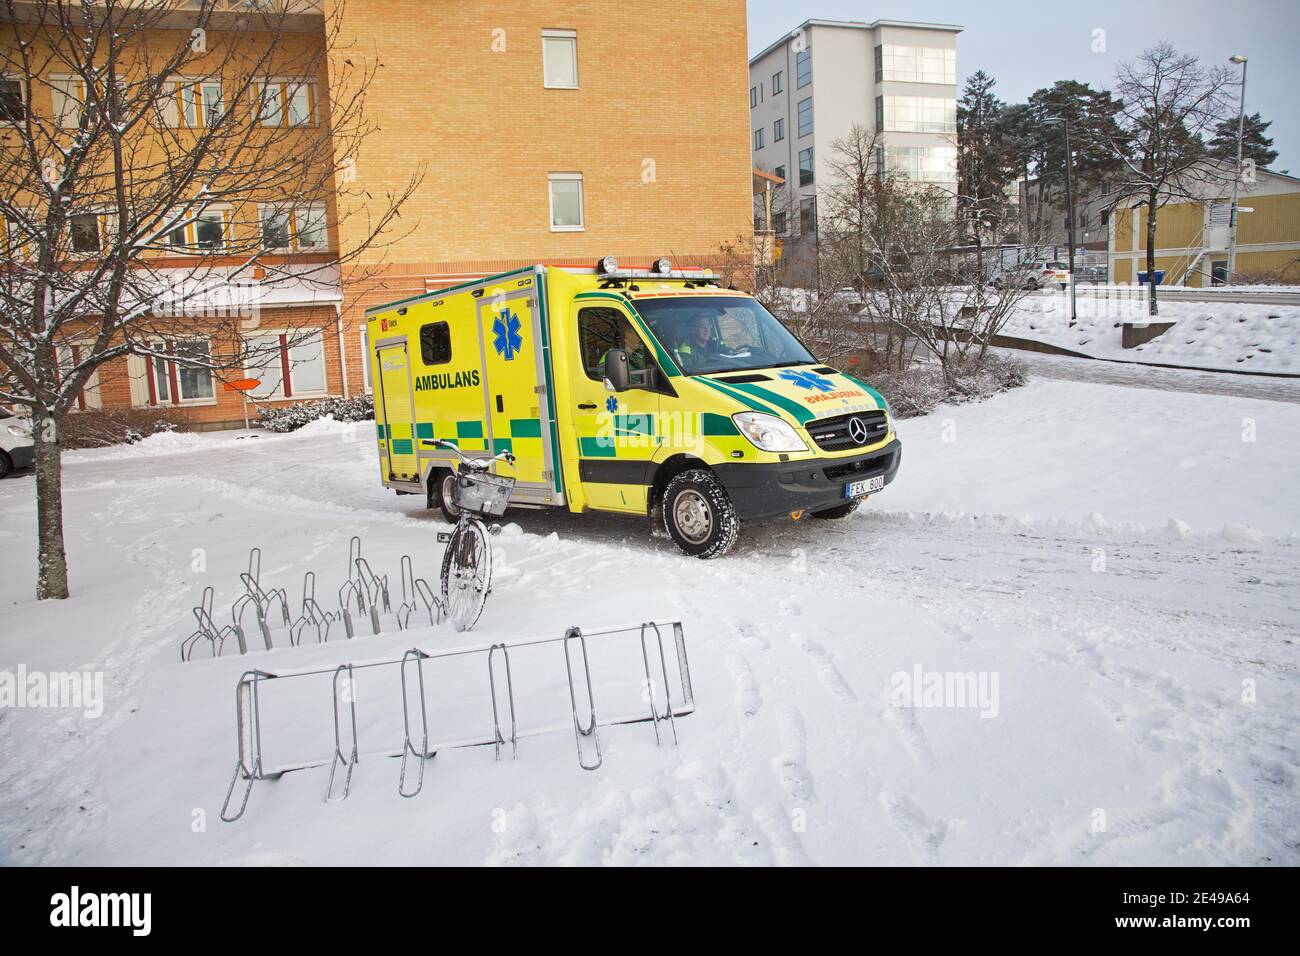 LINKÖPING, SWEDEN- 7 JANUARY 2015: The Swedish nurse who was exposed to Ebola in Sierra Leone on Friday is being picked up today from the University Hospital in Malmö to Linköping with a High-Risk Infection Control Ambulance. Stock Photo